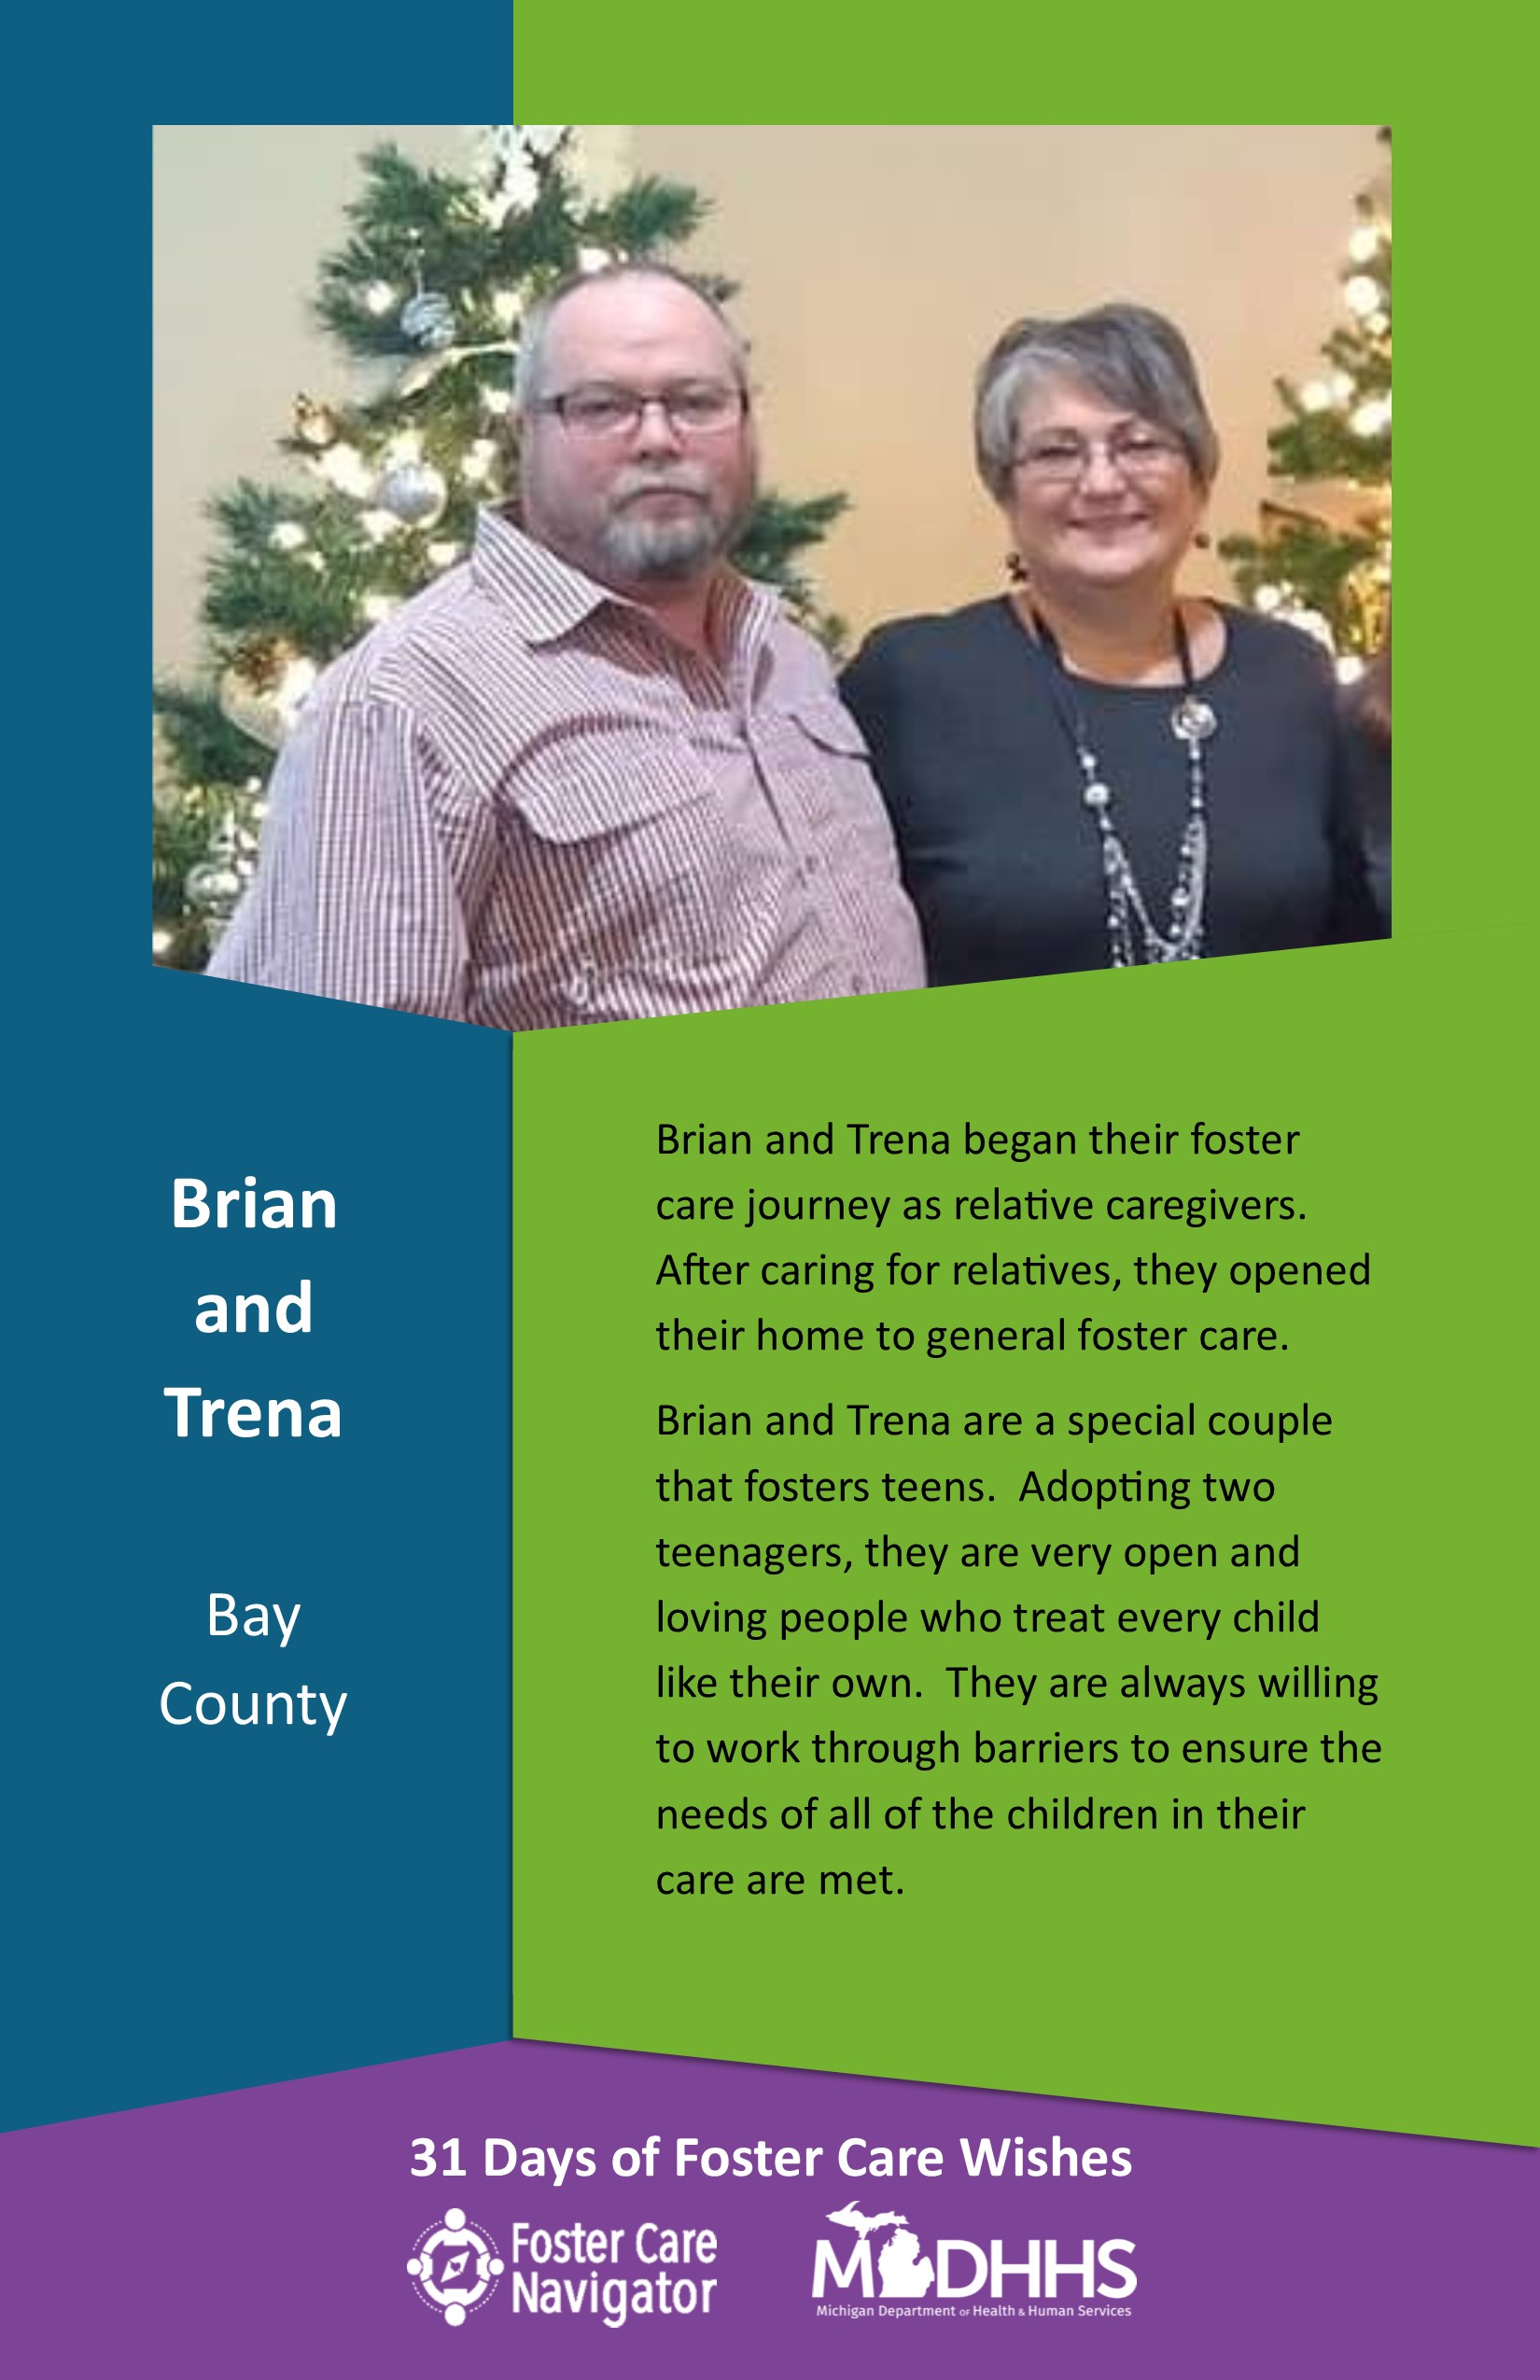 This full page feature includes all of the text listed in the body of this blog post as well as a photo of Brian and Trena. The background is blue on the left, green on the right, and purple at the bottom of the page where the logos are located.